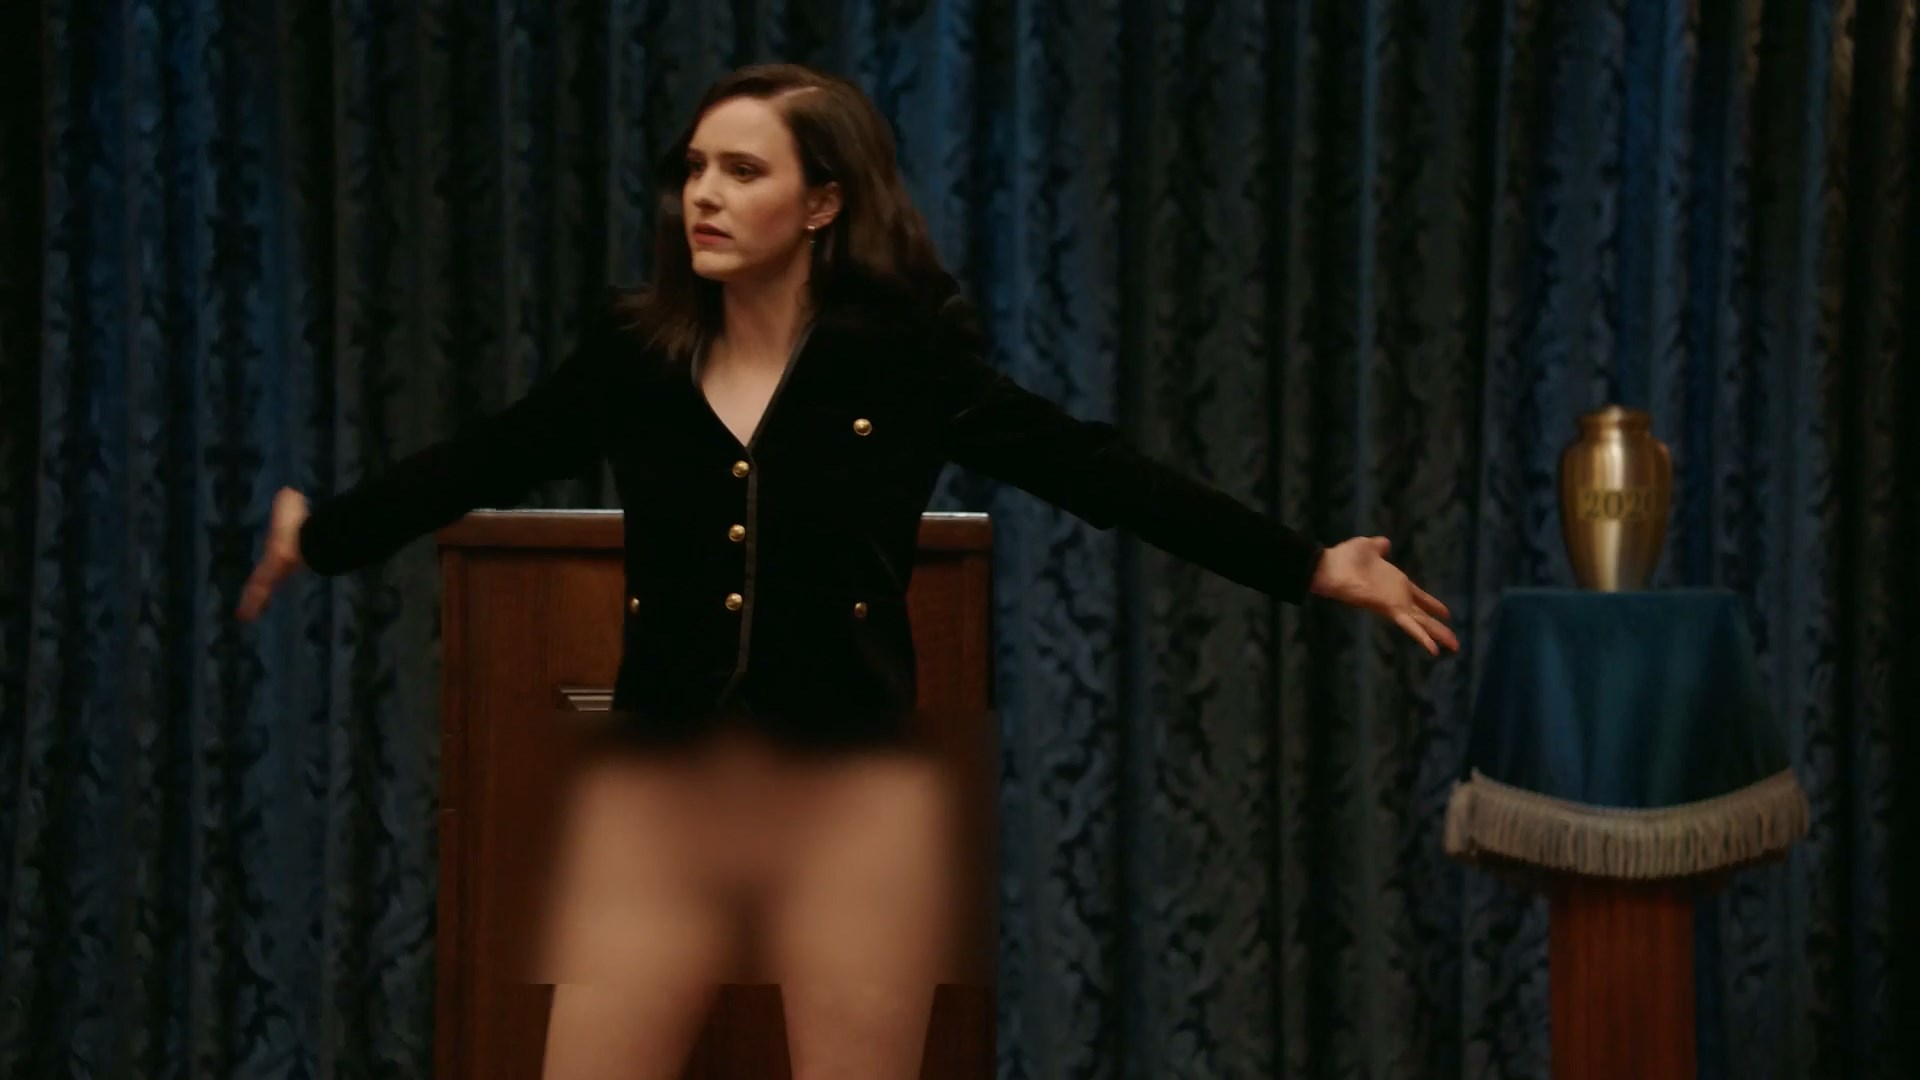 Topless miss maisel The Marvelous